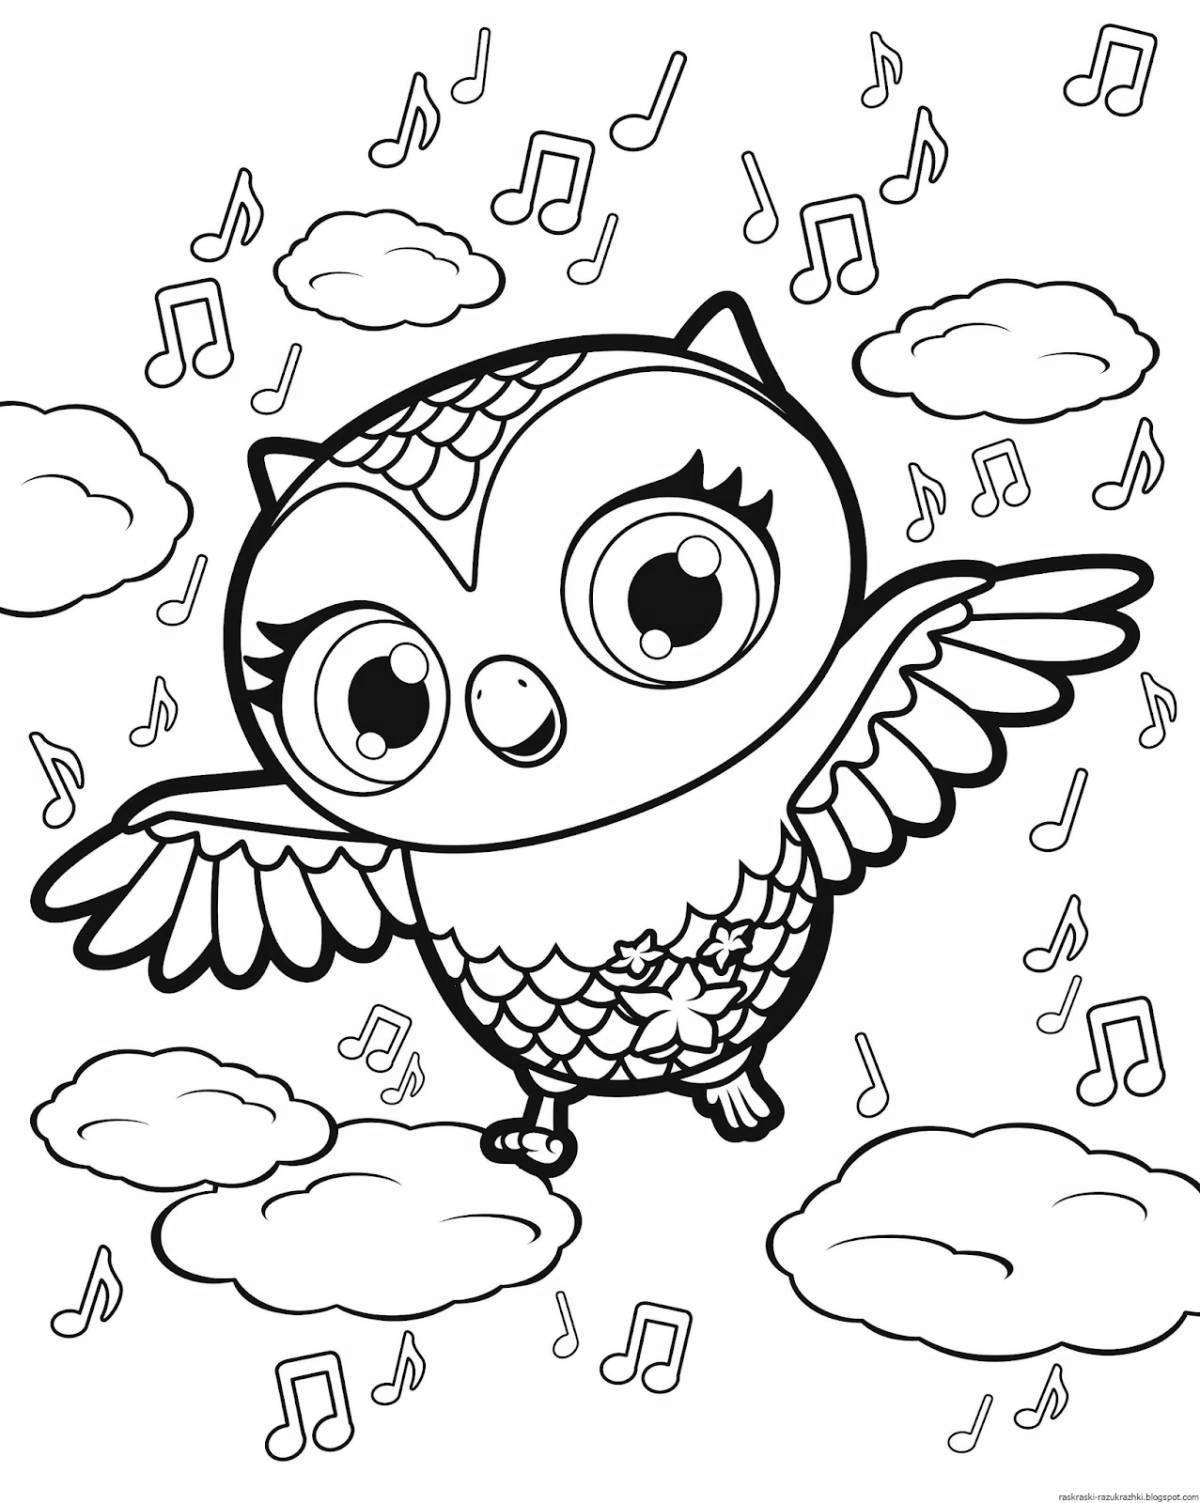 Colorful owlet coloring page